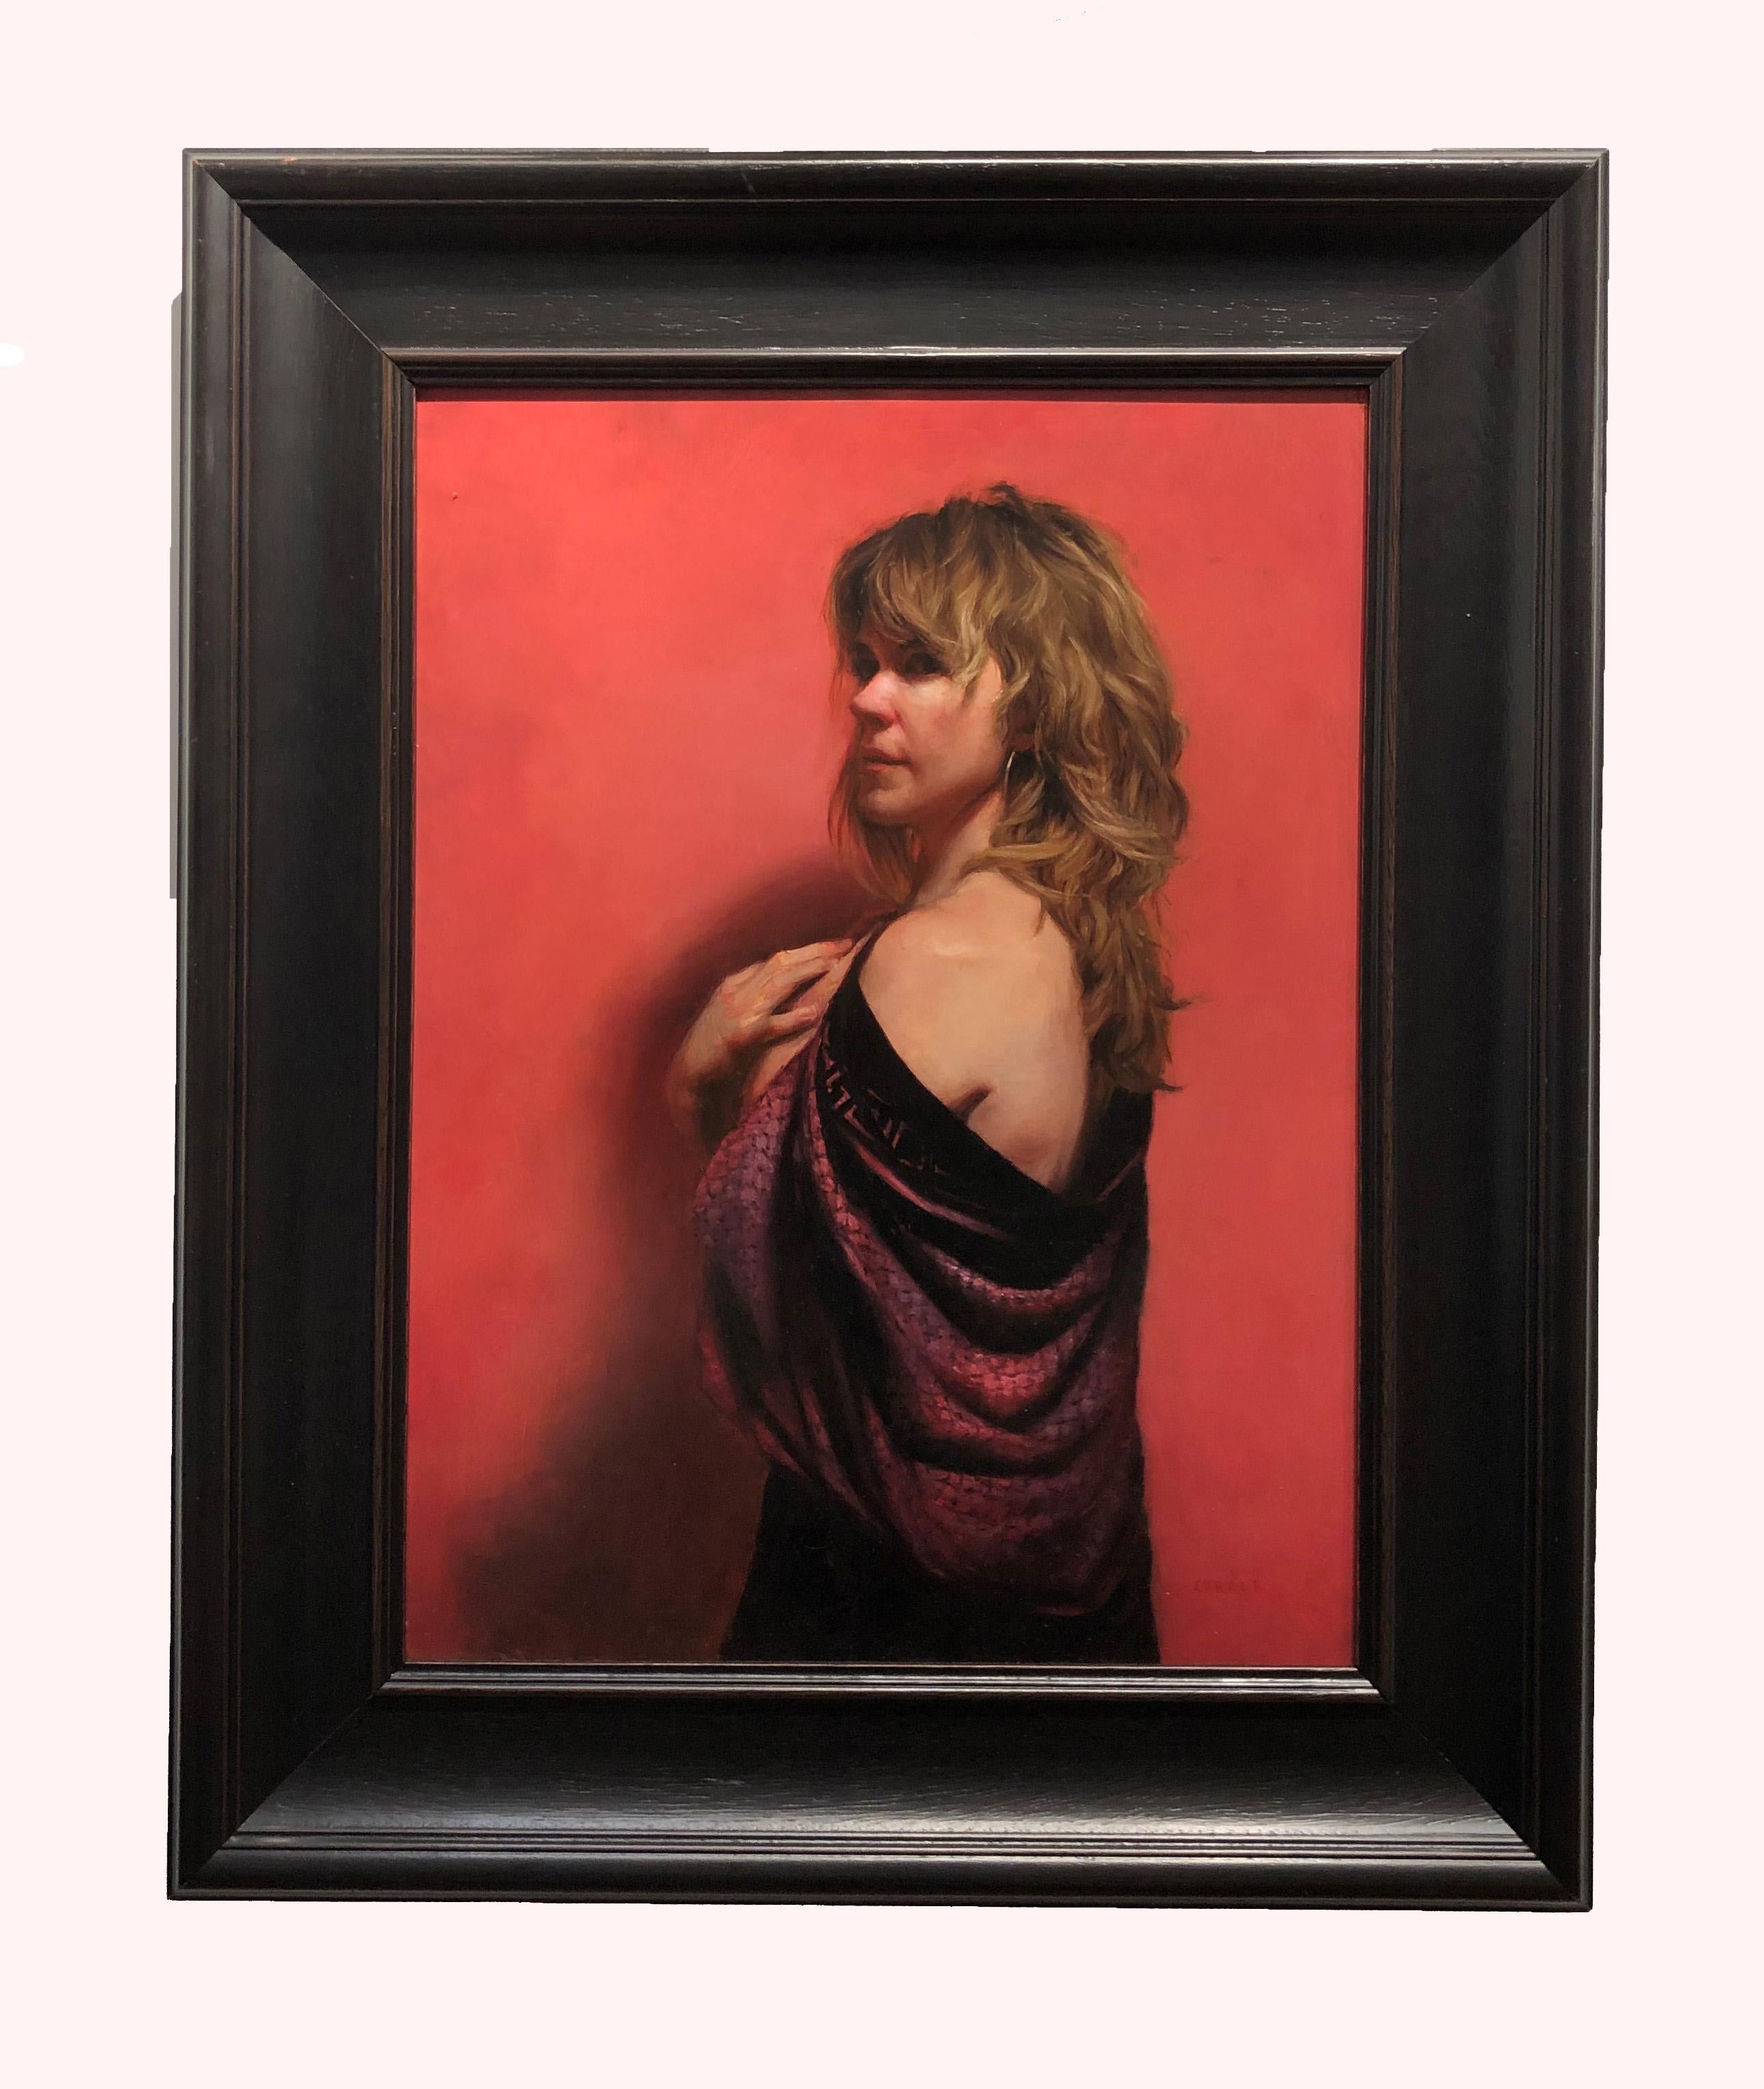 Pink Room - Female Figure Draped in Fabric, Original Oil Painting by Zack Zdrale For Sale 1